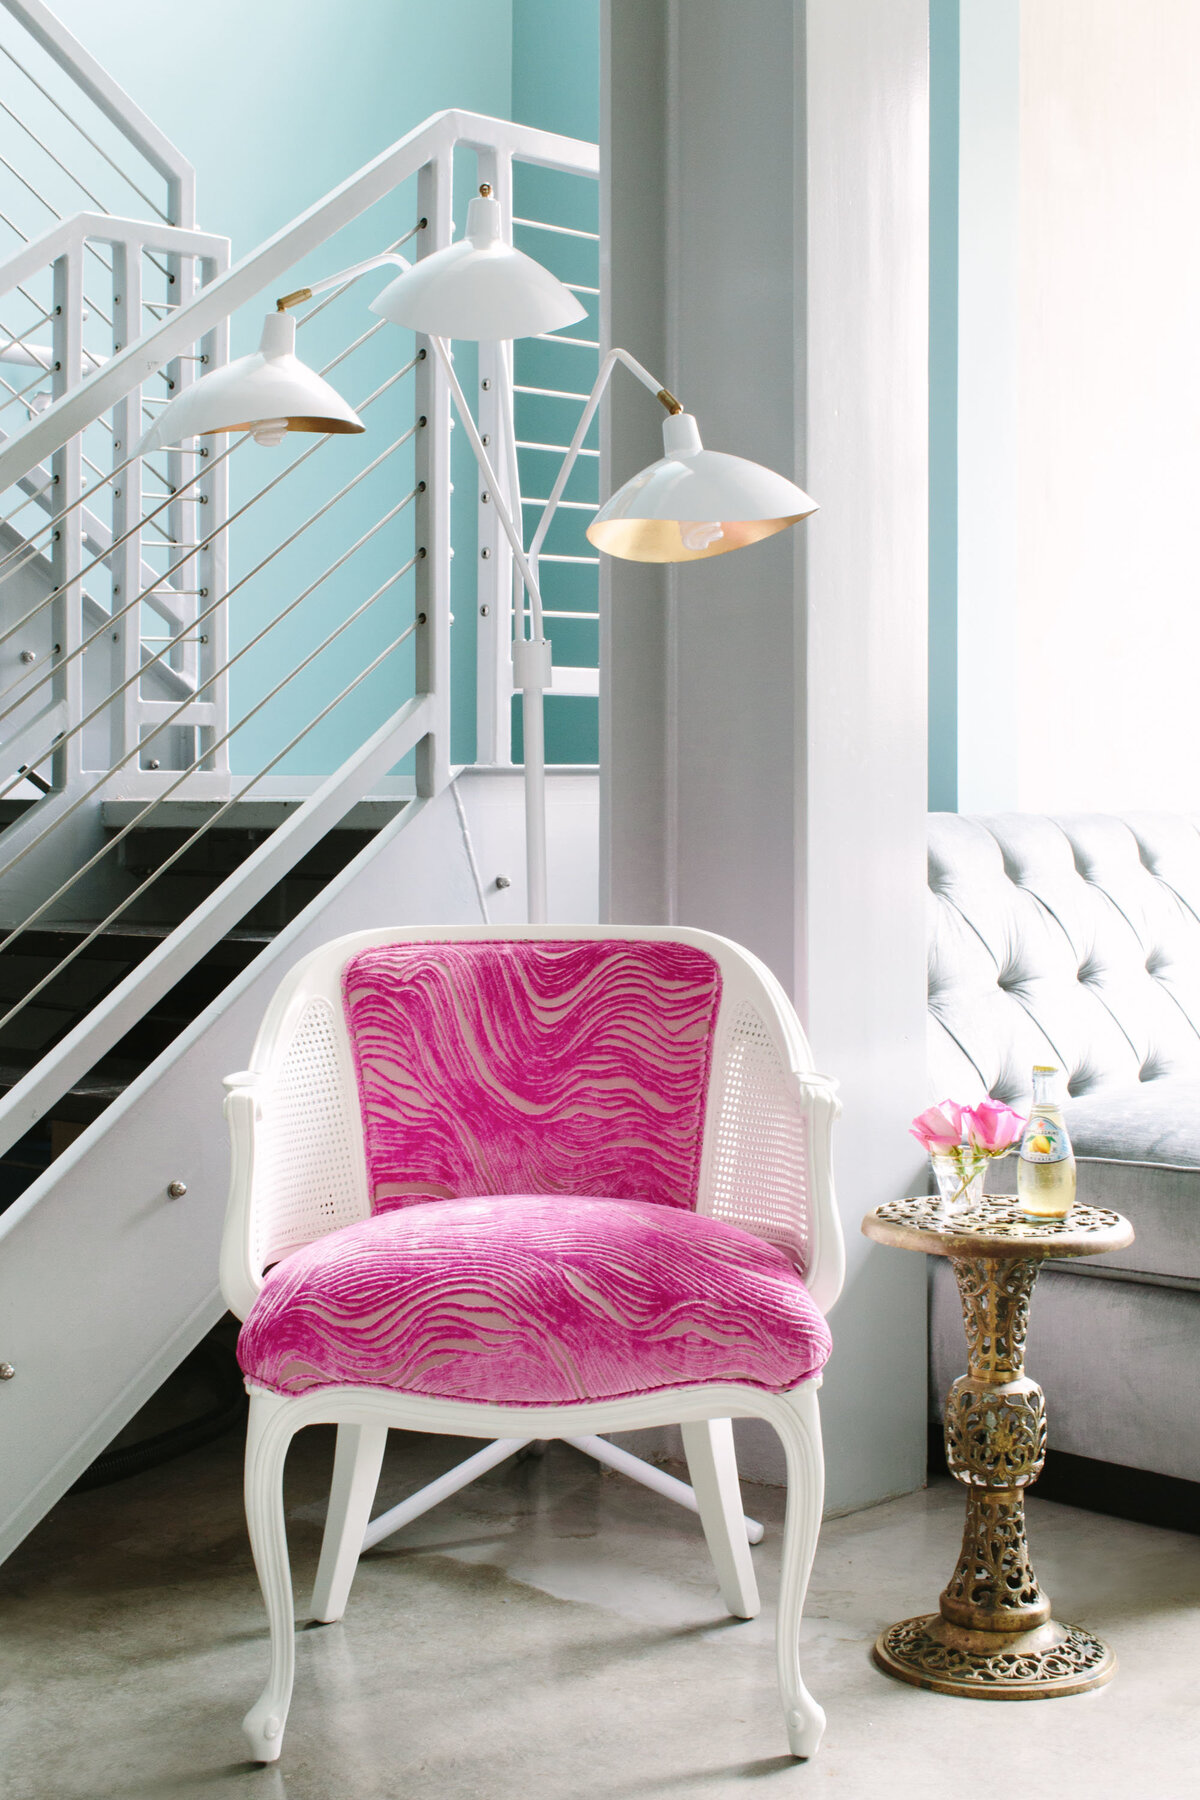 French chair with pink upholstery paired with a modern floor lamp